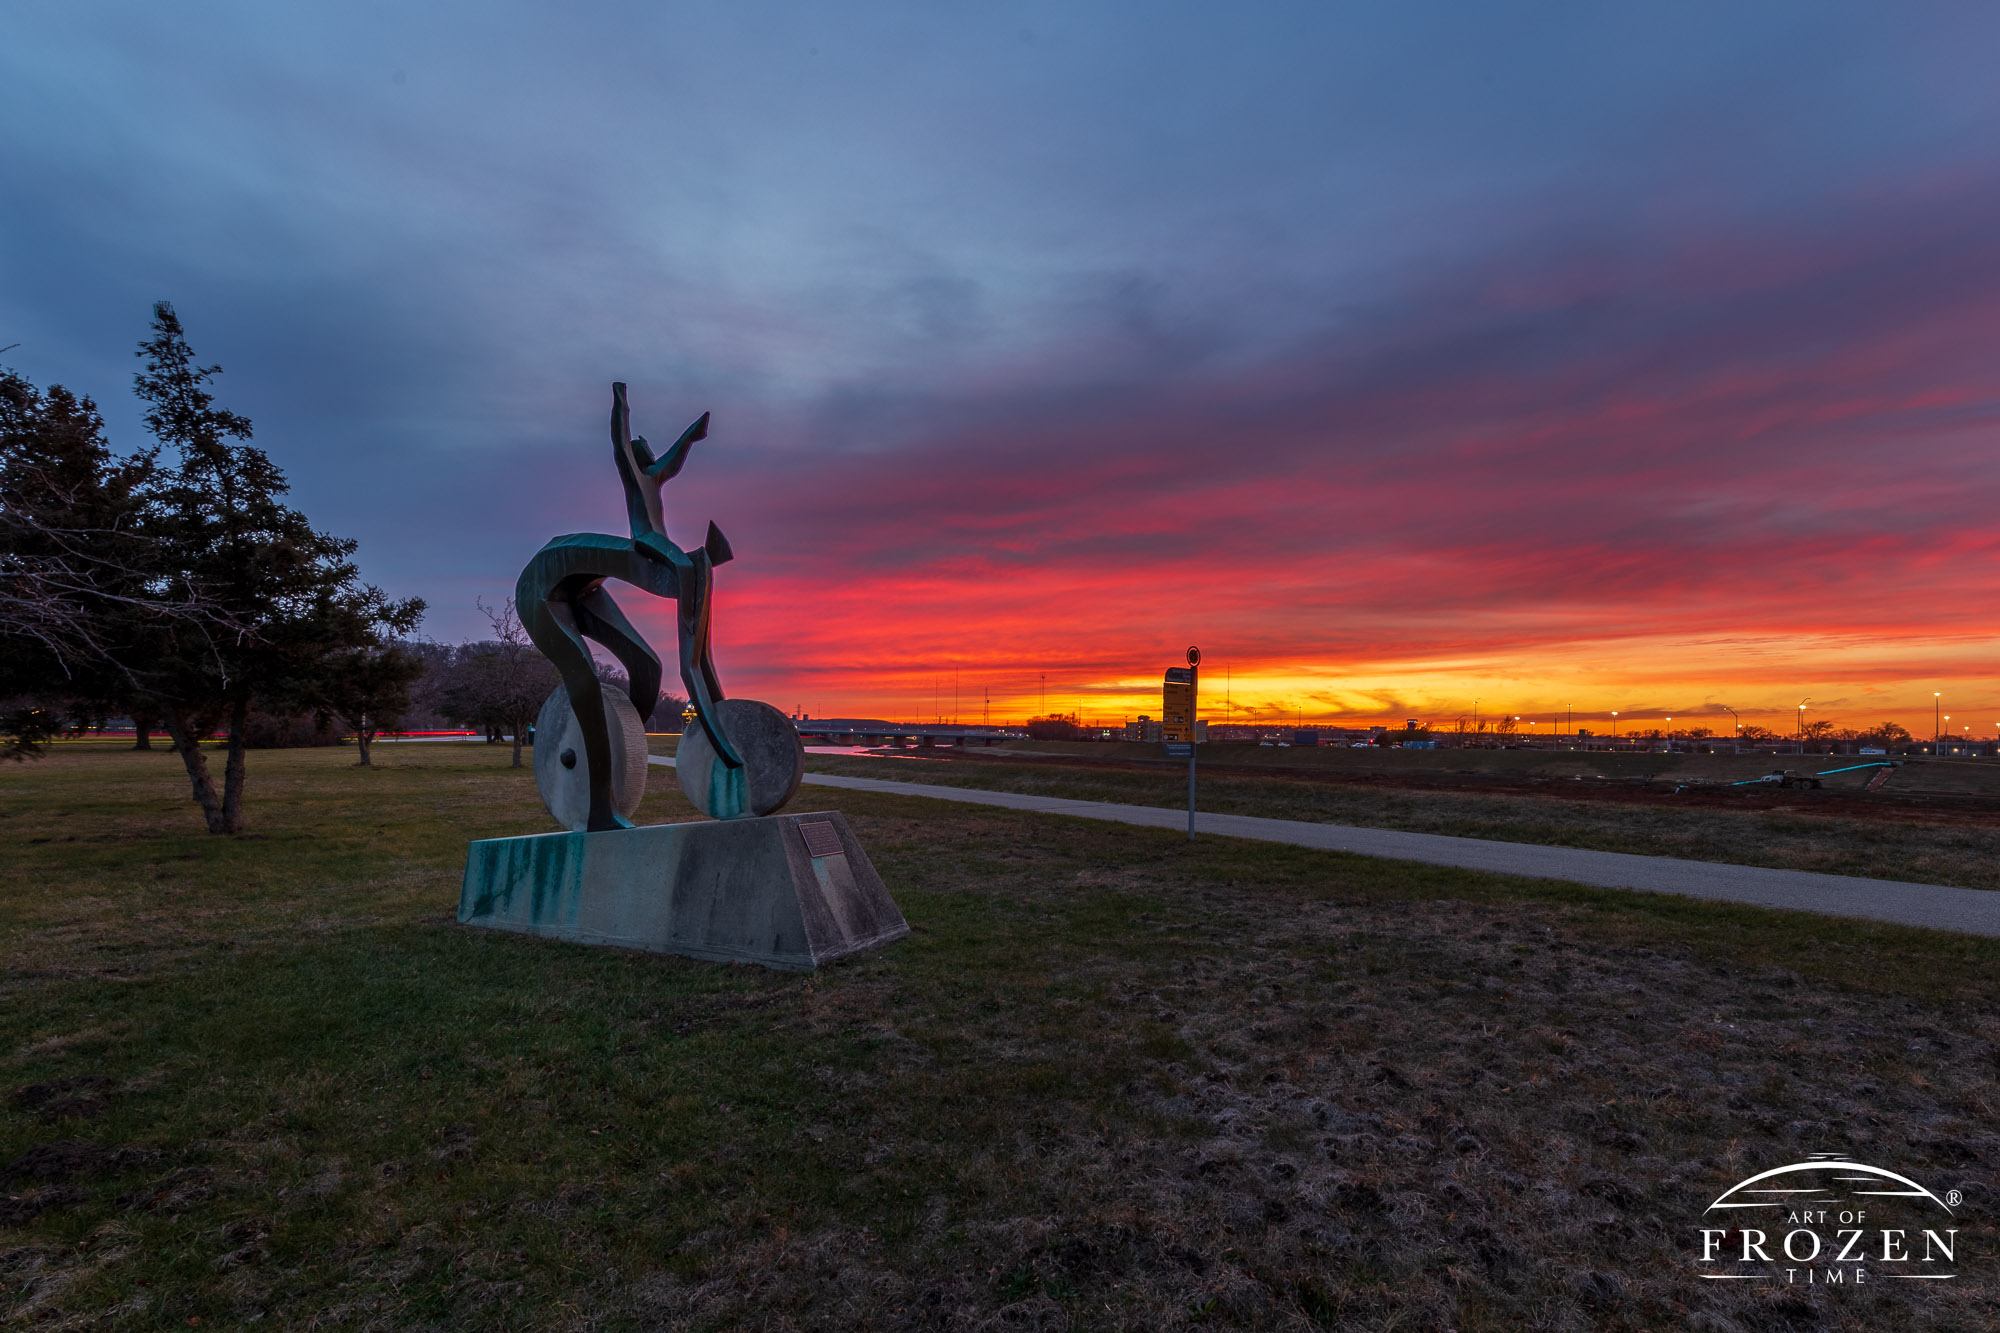 A modern sculpture celebrating bicycling stands along the Great Miami River Trail during a richly colored sunset. The rider’s outstretched arms strike joyous pose as if expressing excitement over the brief and brilliant display of color along the Dayton Ohio skyline.